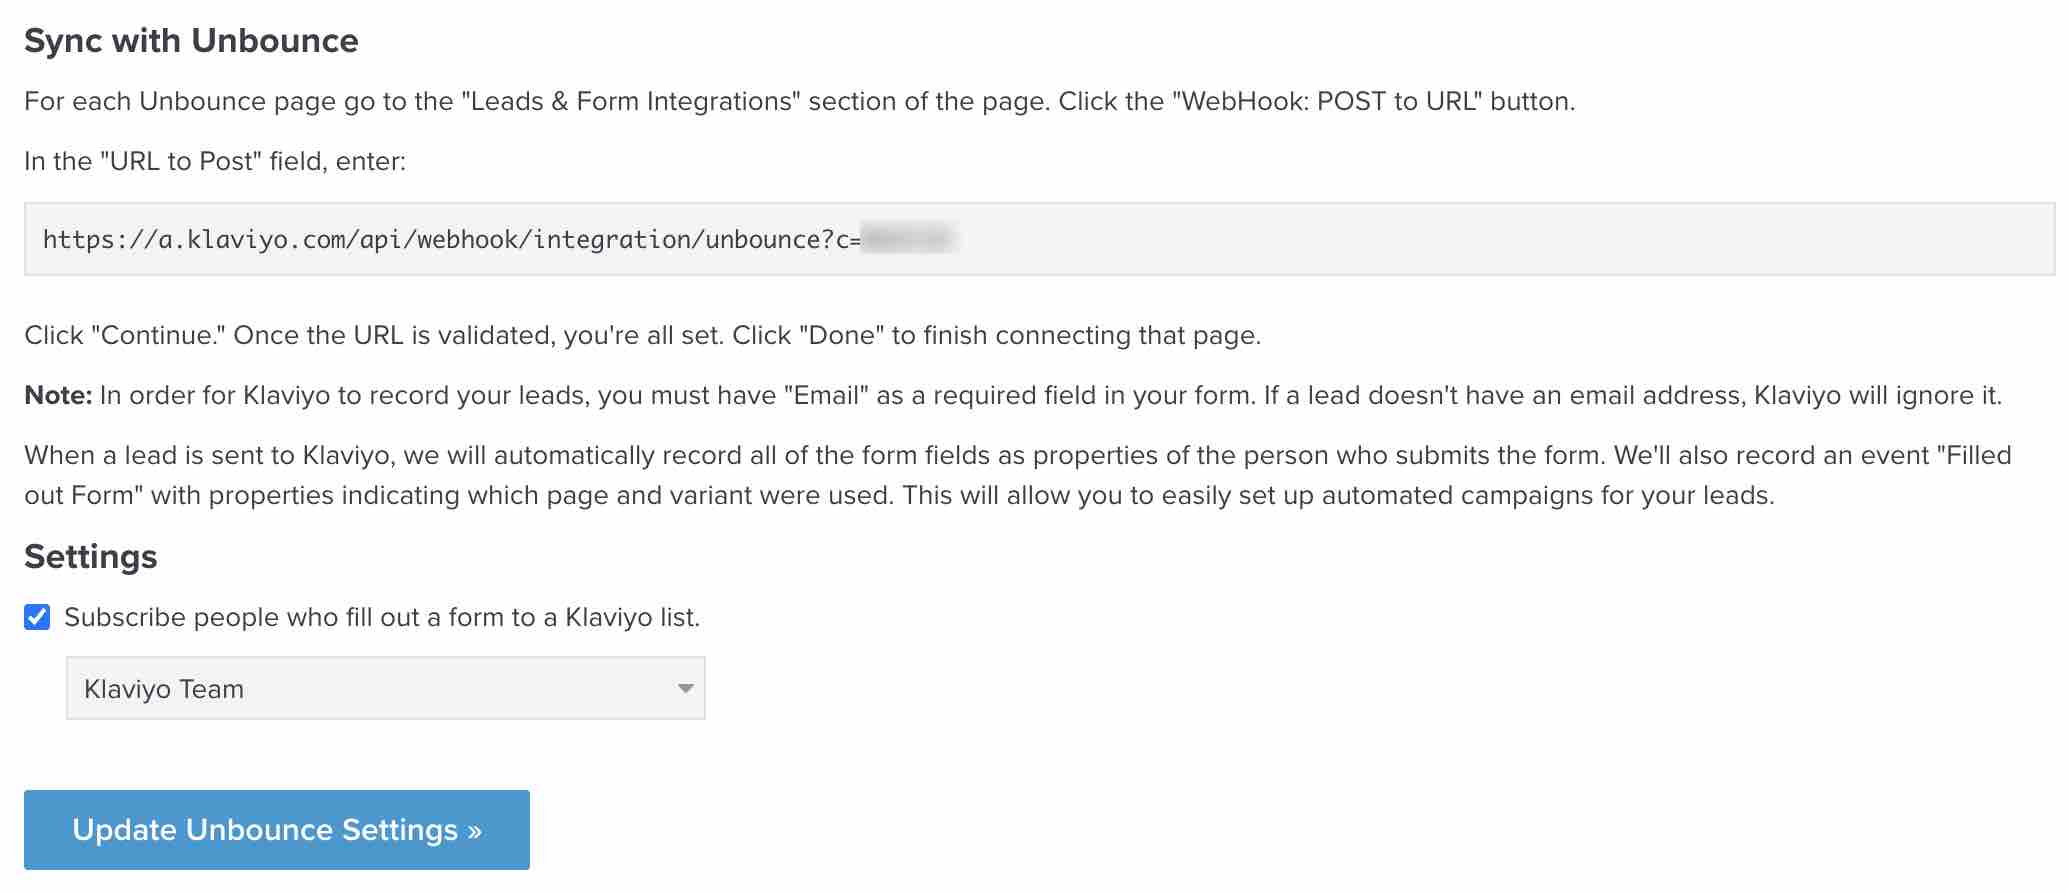 Unbounce integration settings page in Klaviyo with webhook URL in textbox